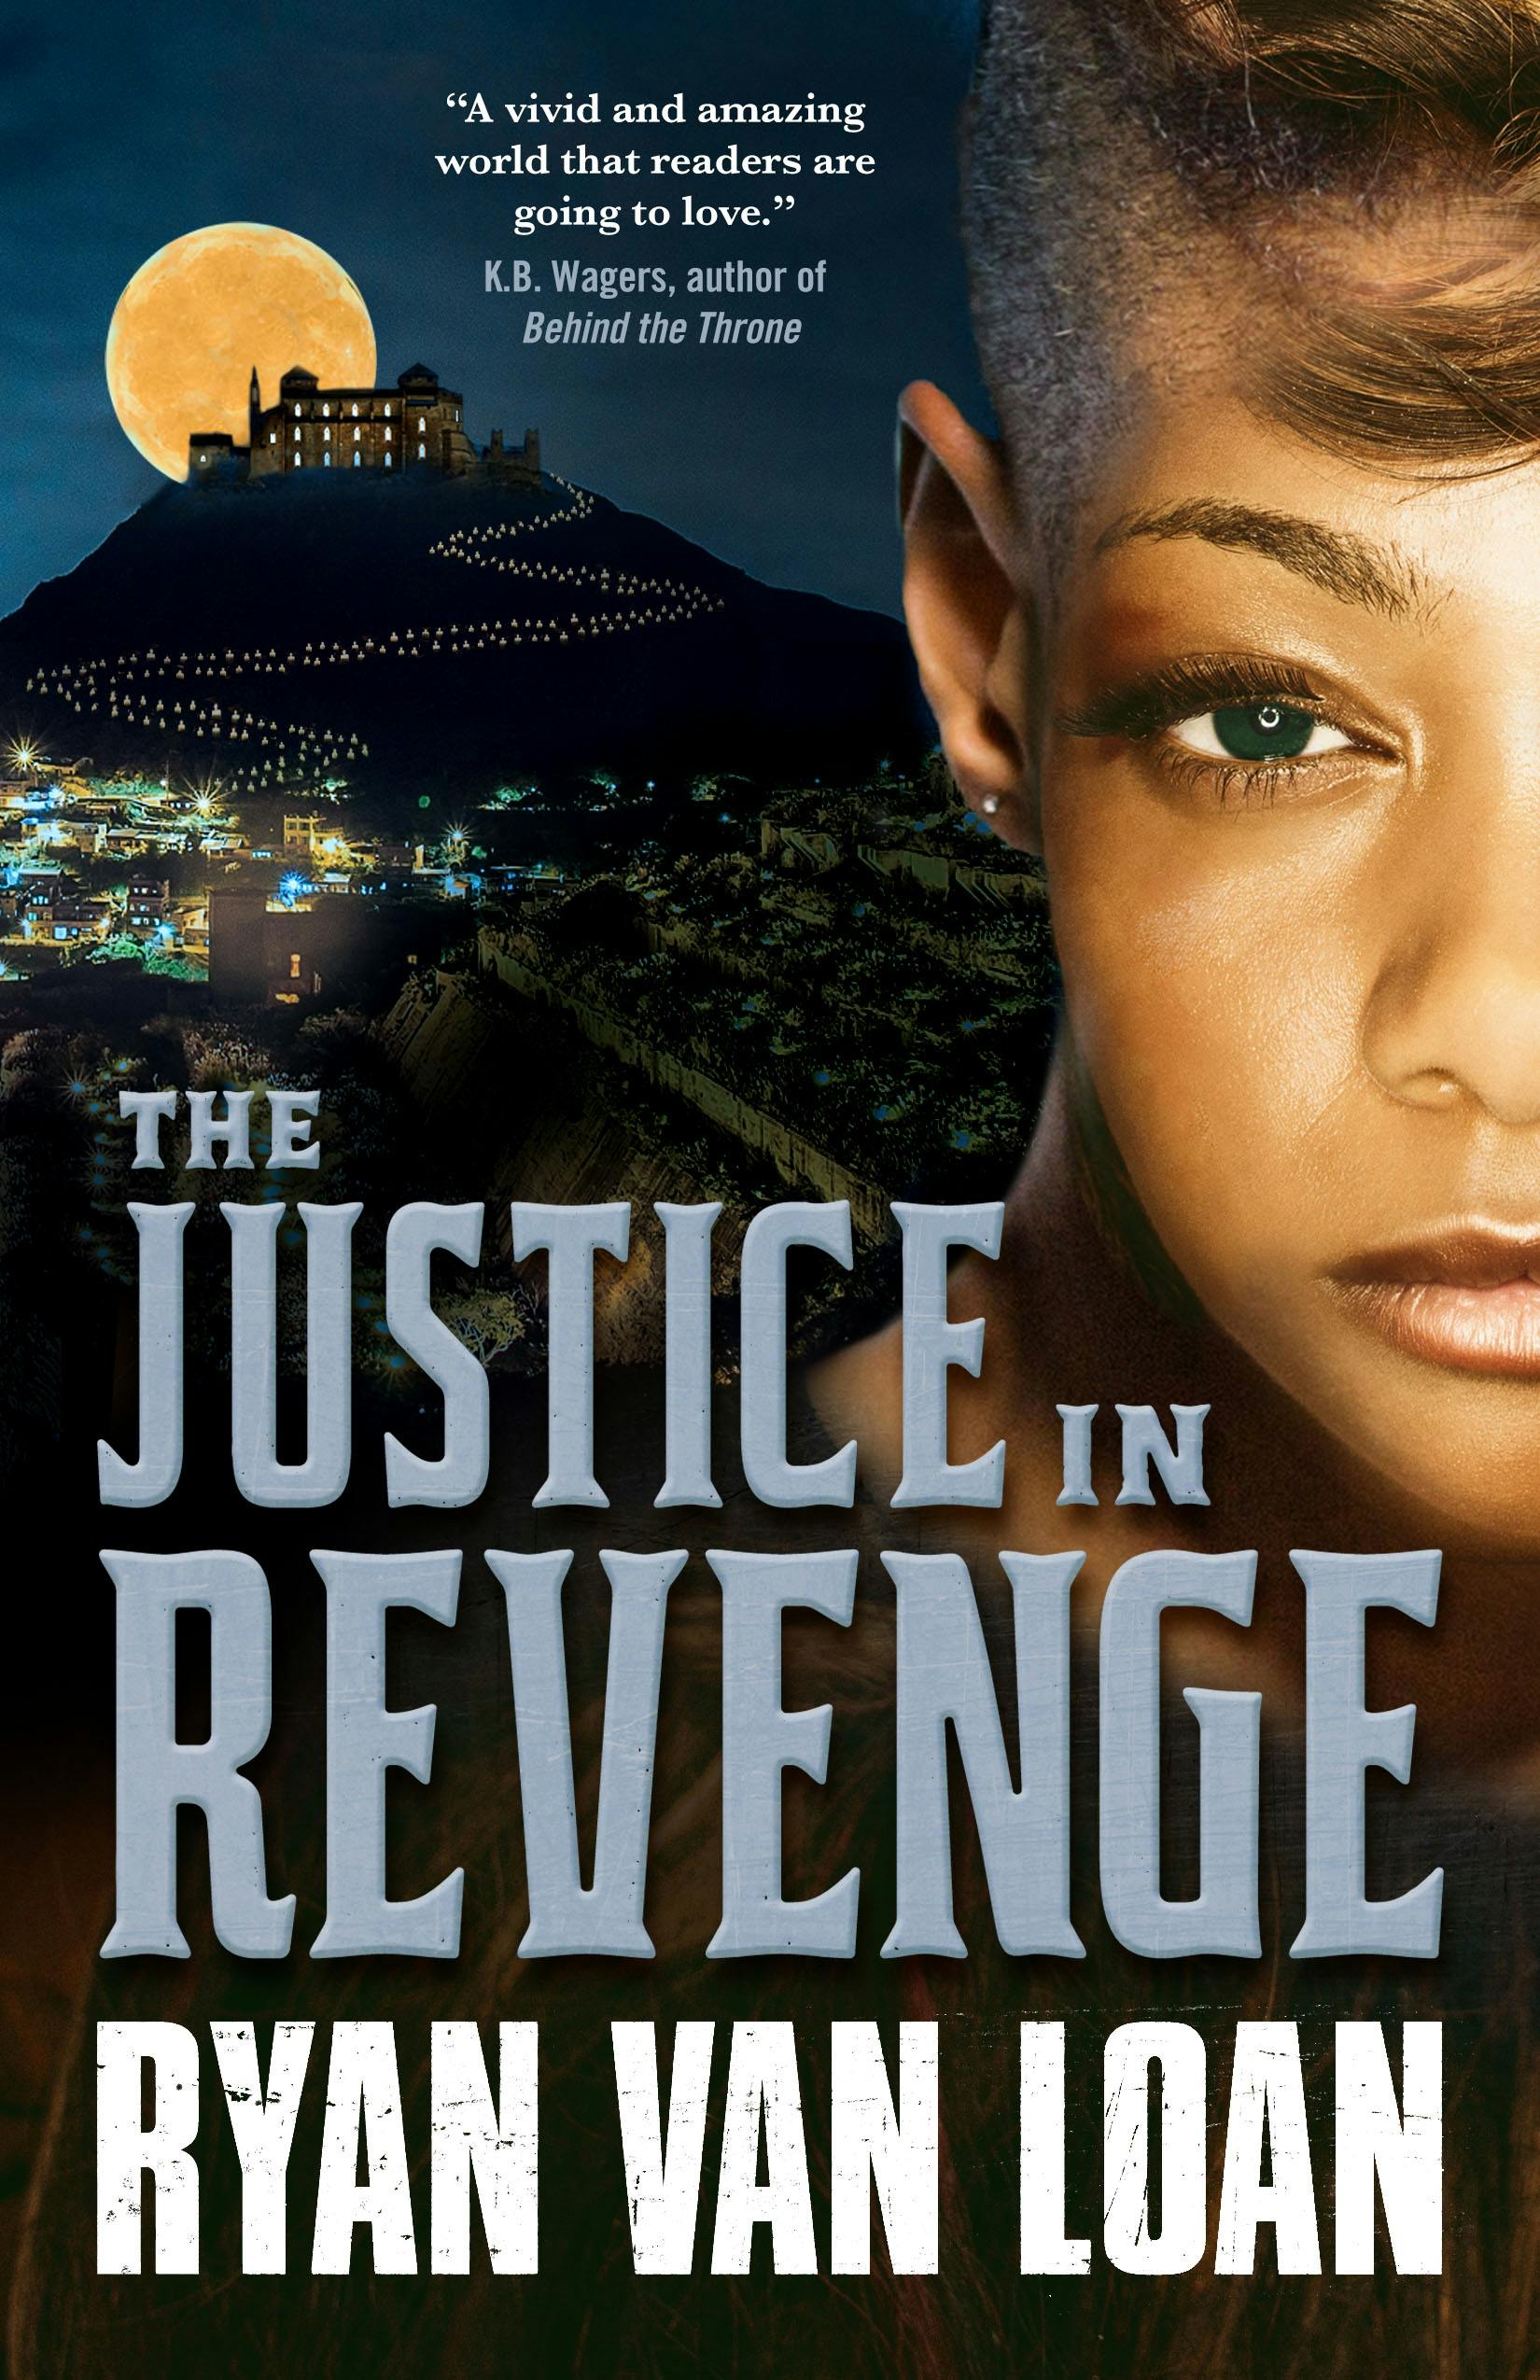 Cover for the book titled as: The Justice in Revenge